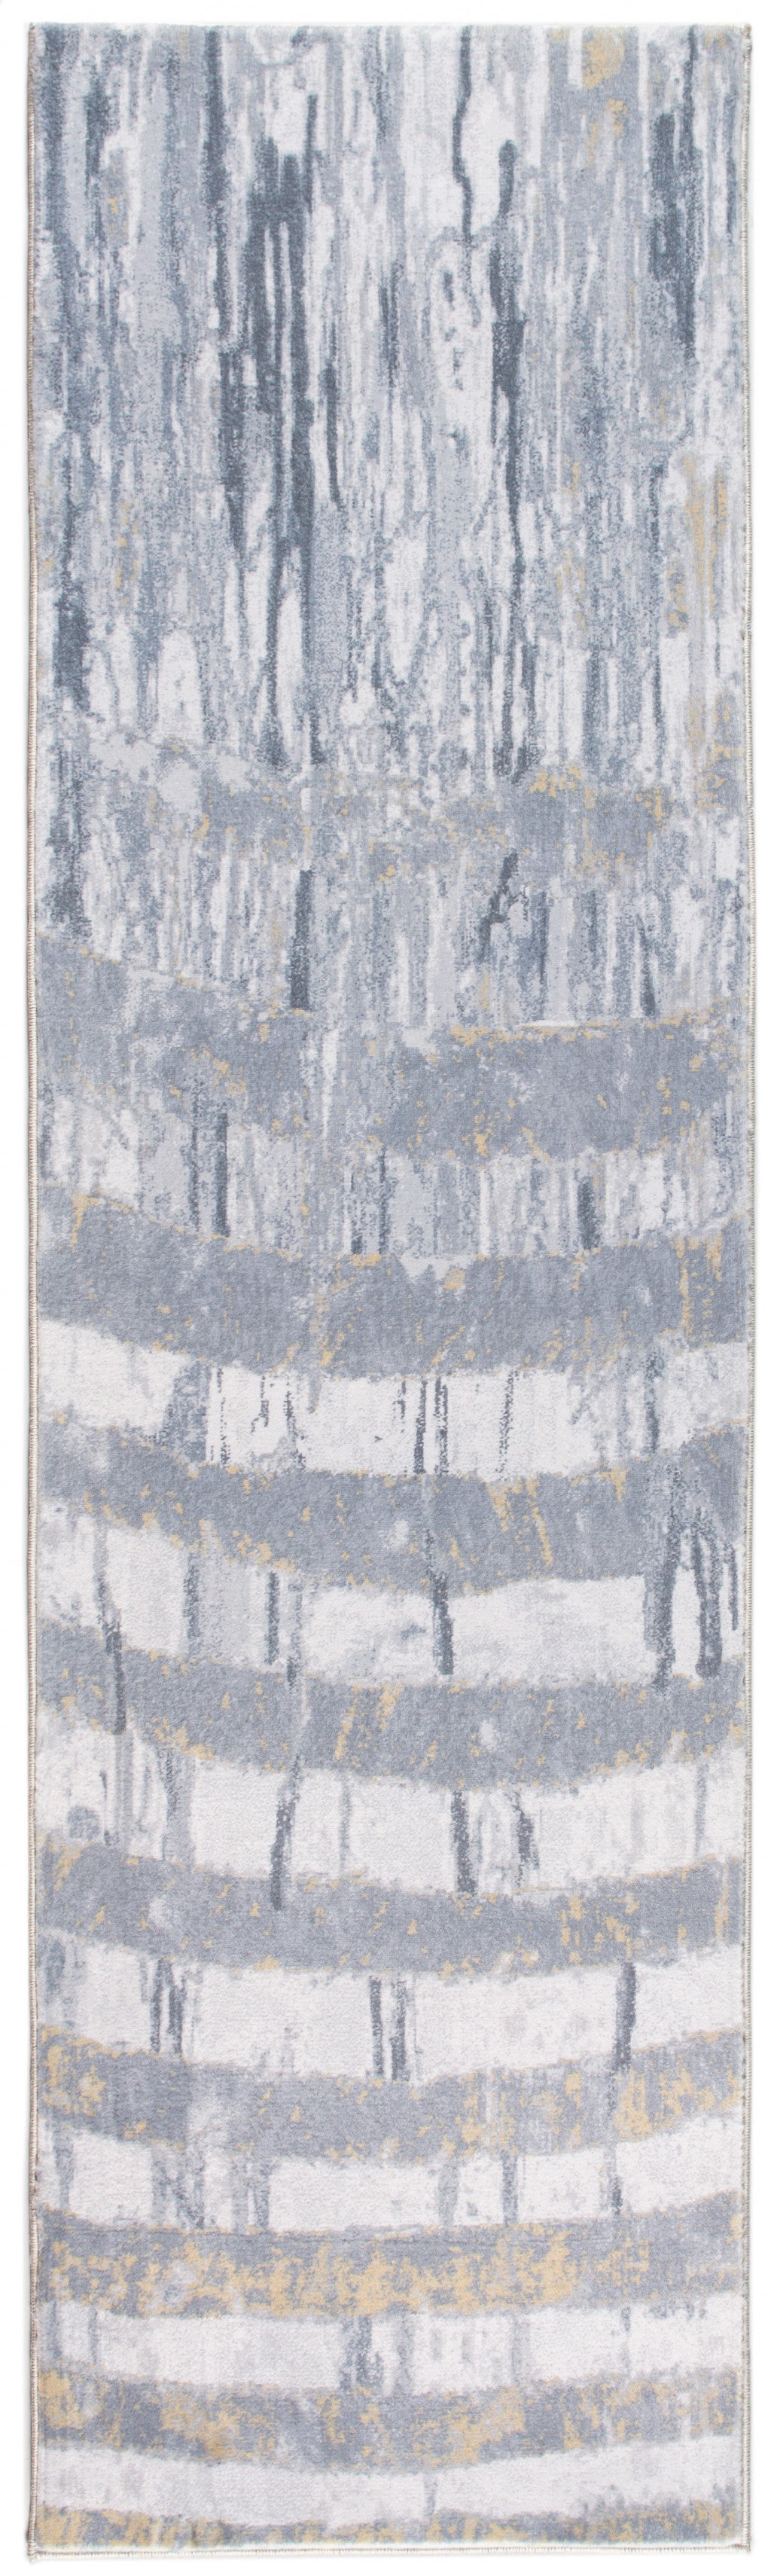 5’ x 8’ Gray Distressed Steps Abstract Area Rug